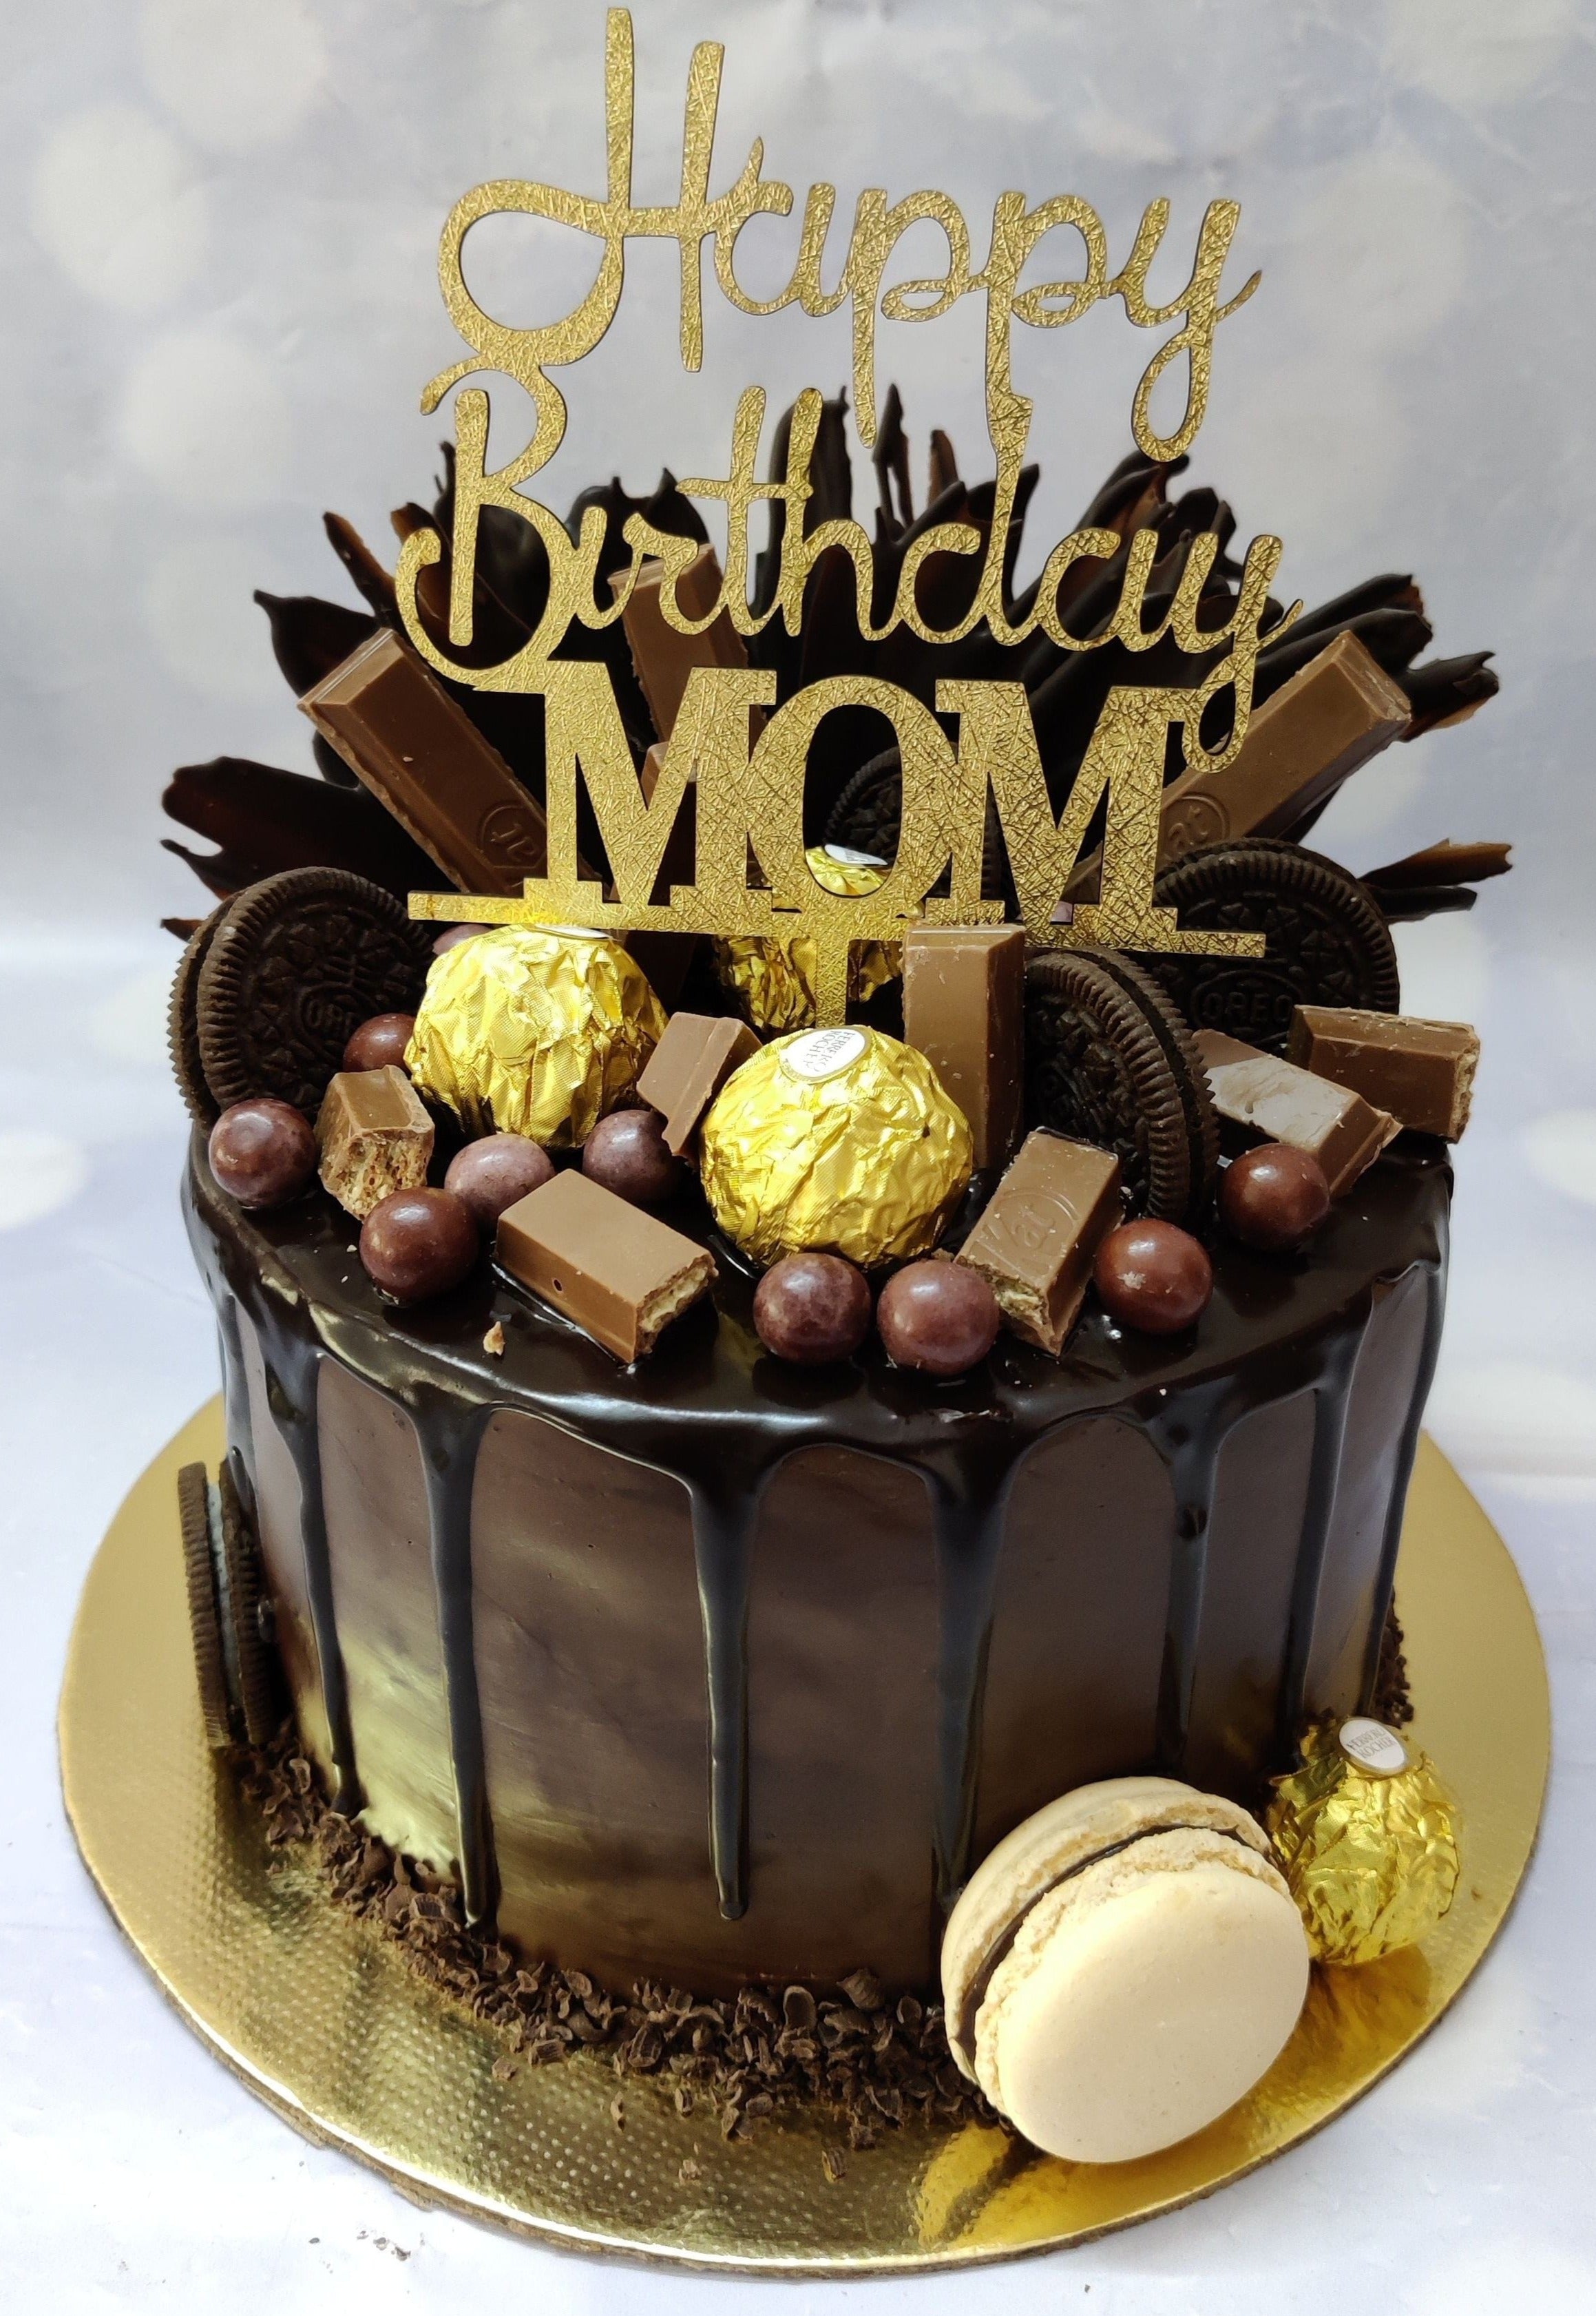 Chocolate Overload Cake Delivery in Sussex | Harry Batten